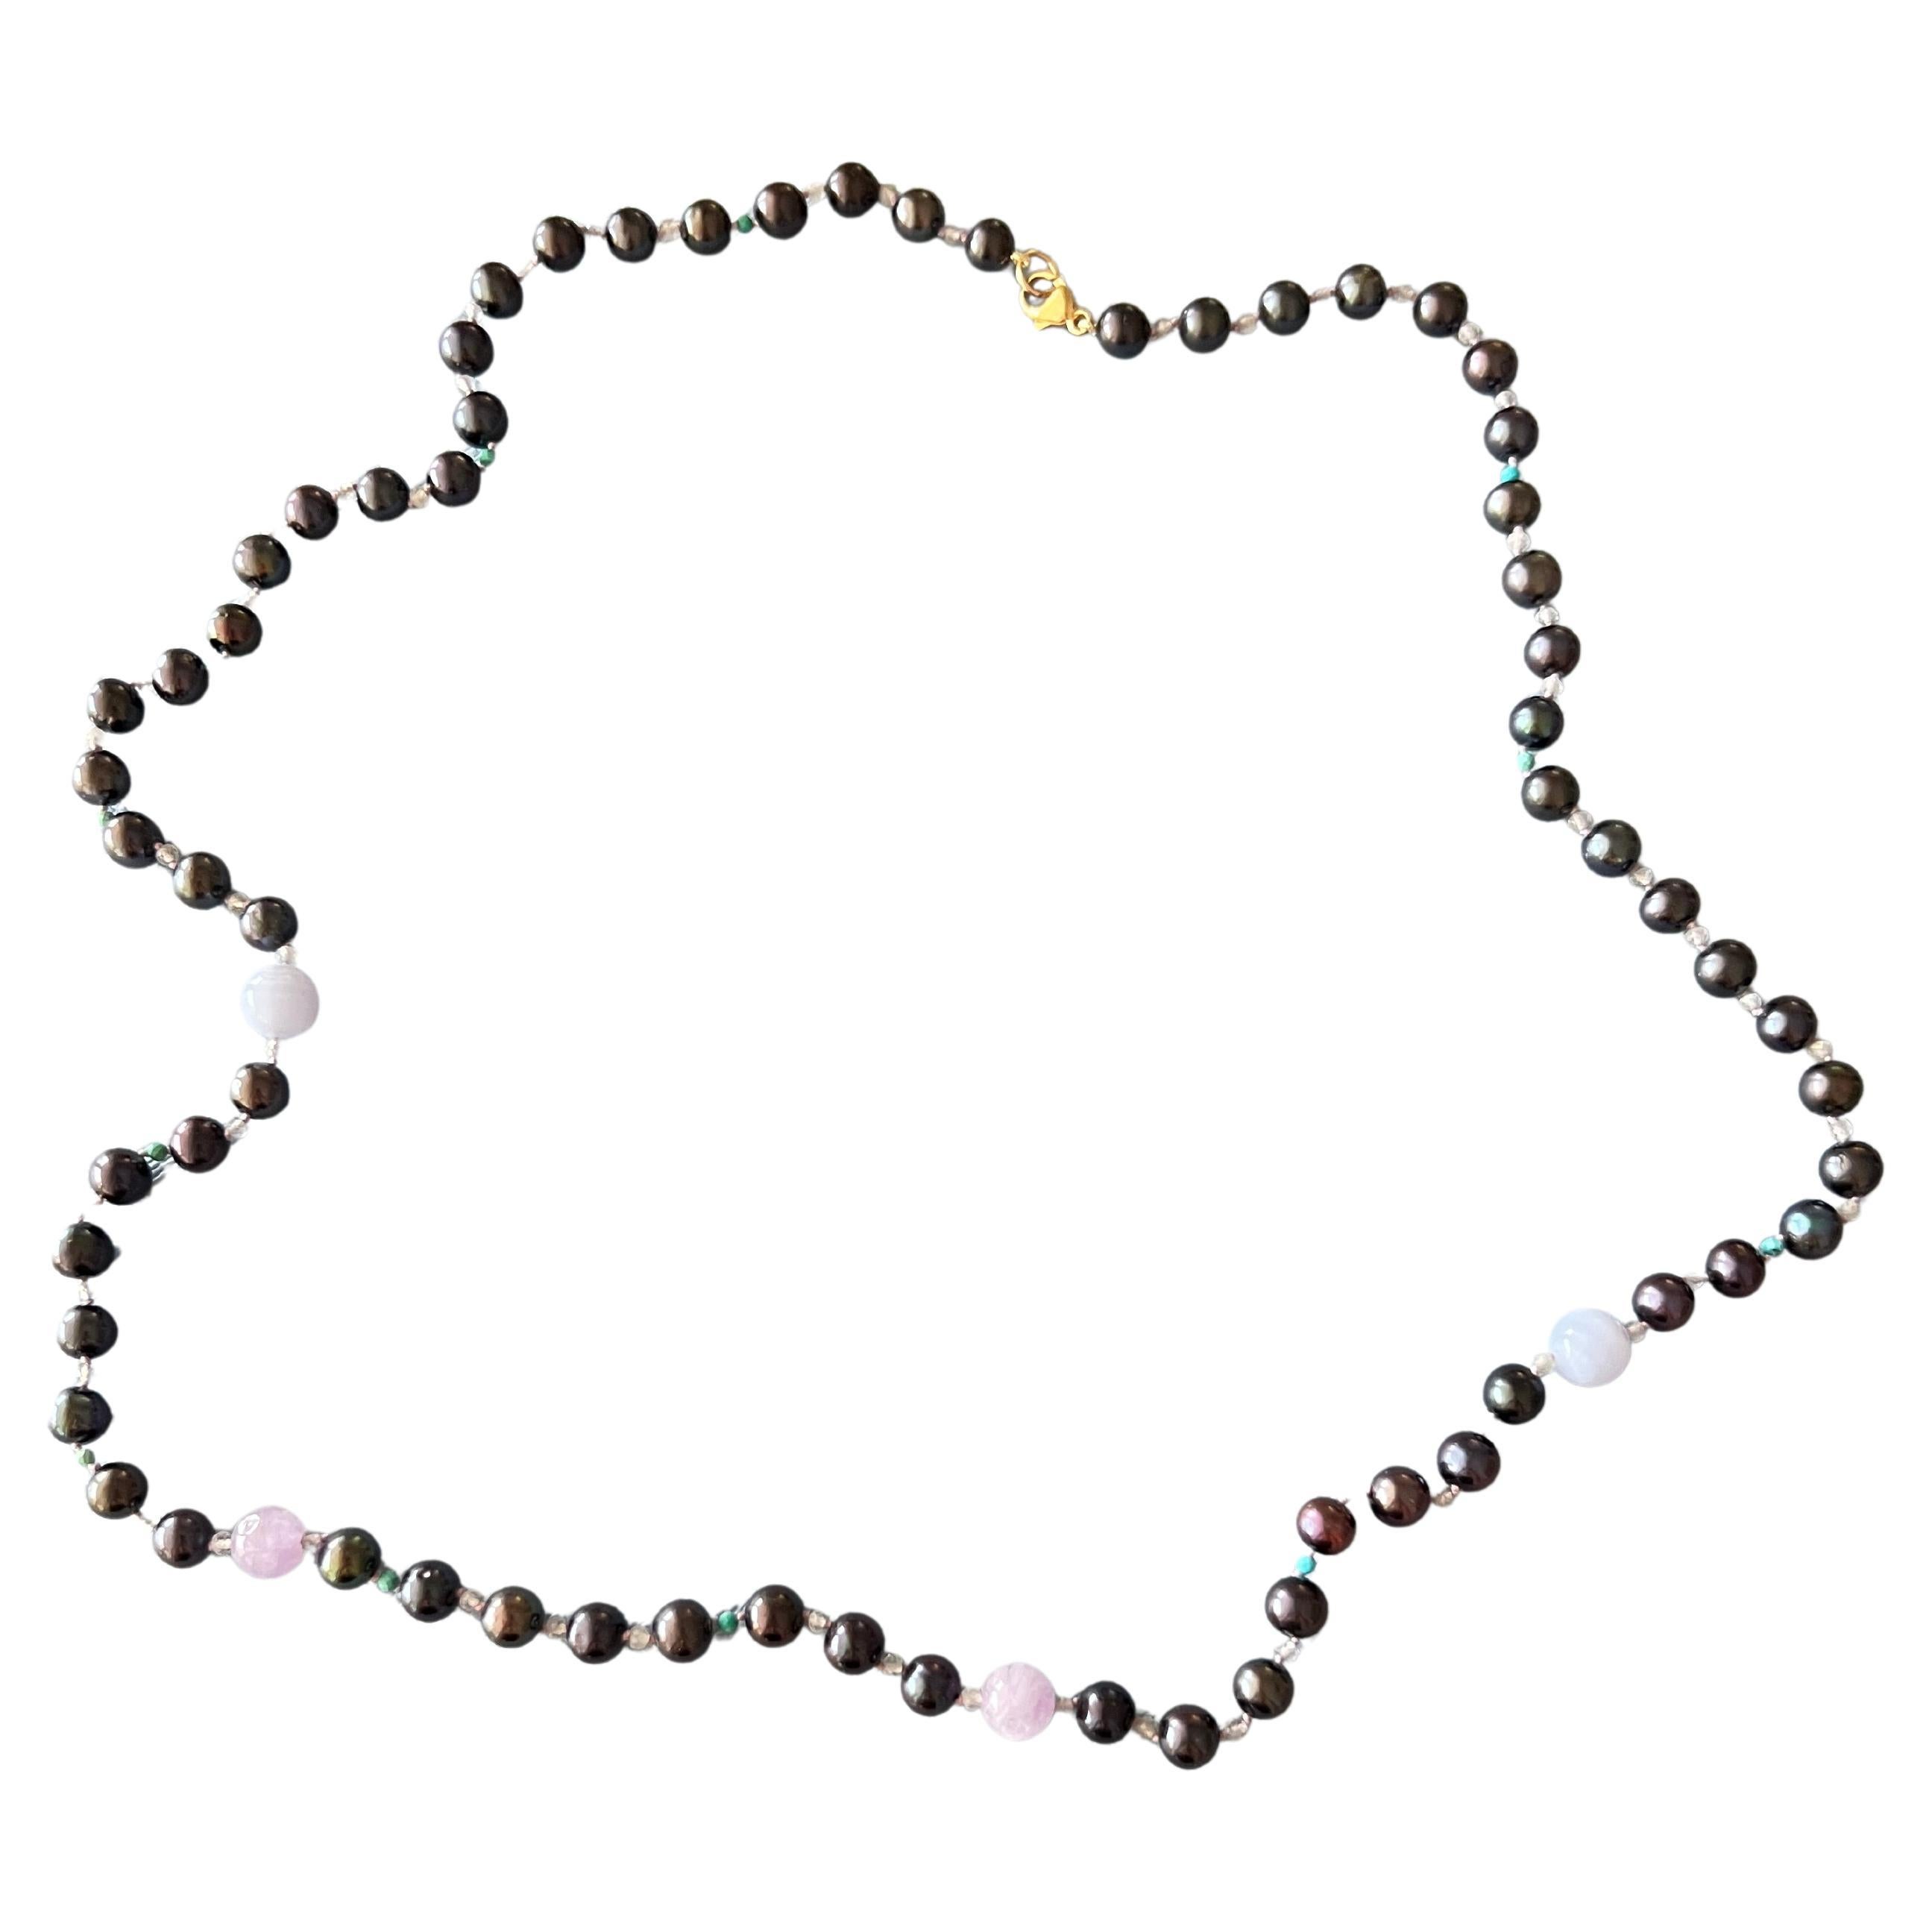 Long Black Pearl Necklace with a few contrasting Amethyst and Blue Lace Agate Beads and with small Grey Rainbow shimmering labradorite and mini Turquoise this necklace is truly unique. 

Length: Approximately Necklace 30